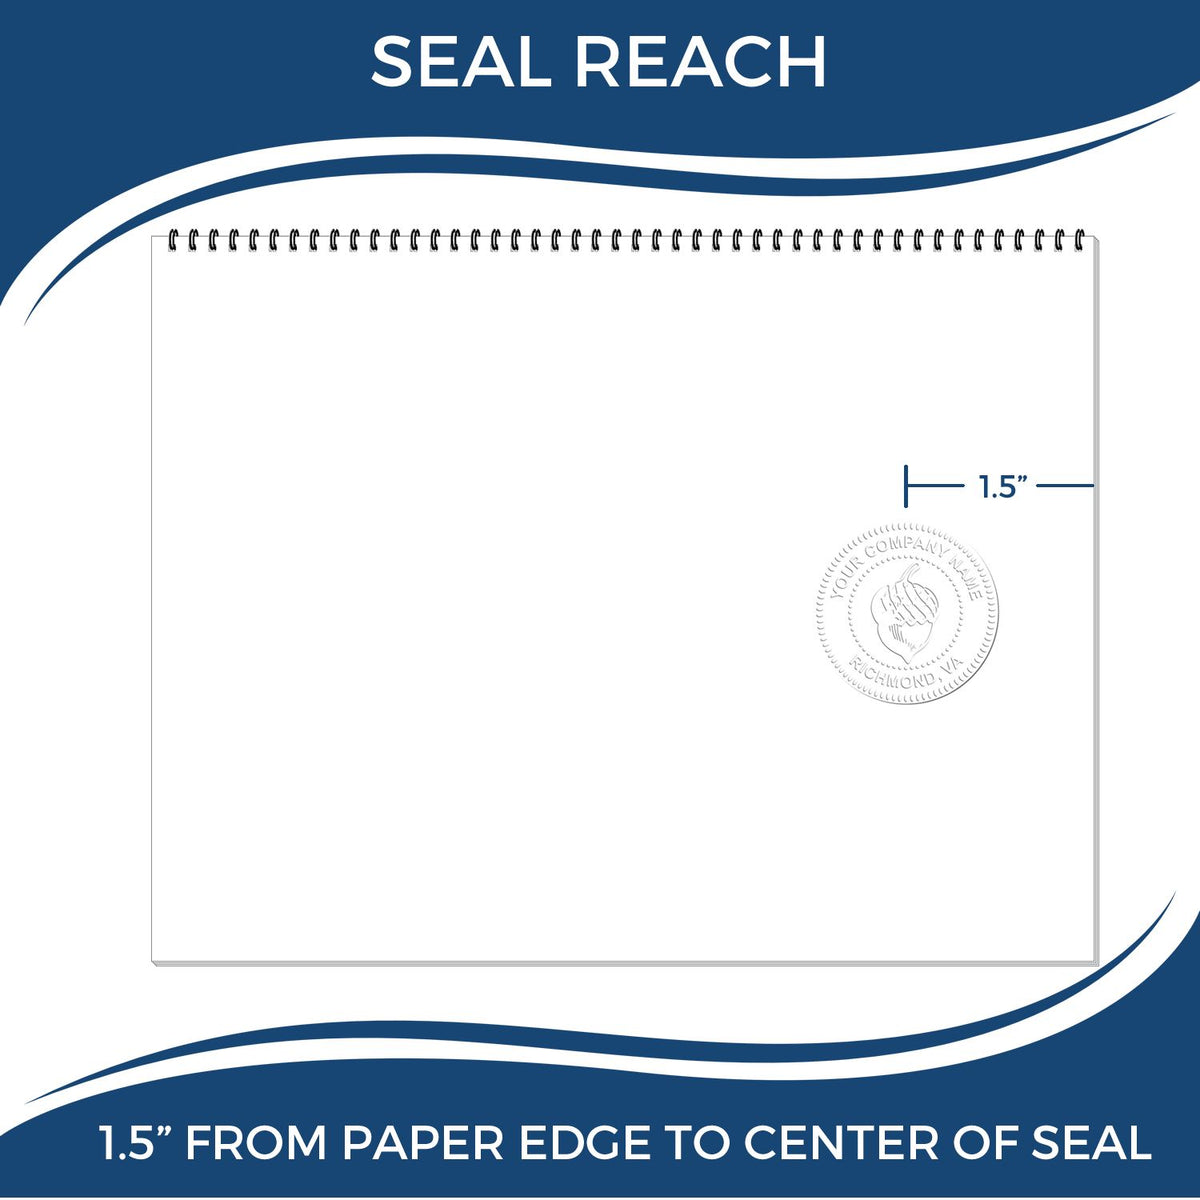 An infographic showing the seal reach which is represented by a ruler and a miniature seal image of the Hybrid Michigan Engineer Seal